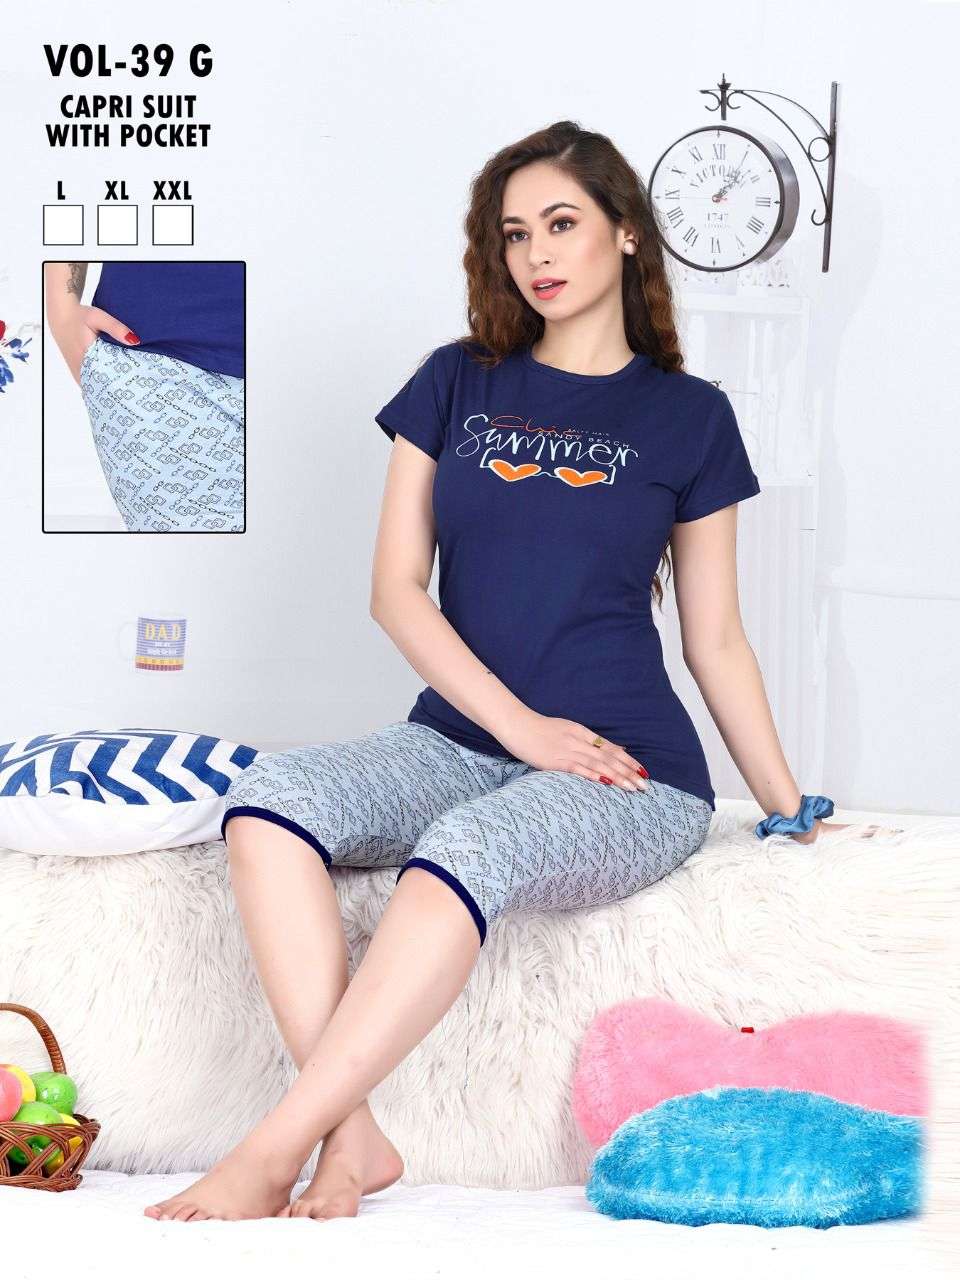 https://www.wholesalecatalog.in/images/product/sub_images/2022/08/fashion-talk-vol-39-g-catalog-night-suits-with-pocket-capri-4-2022-08-25_19_08_01.jpg